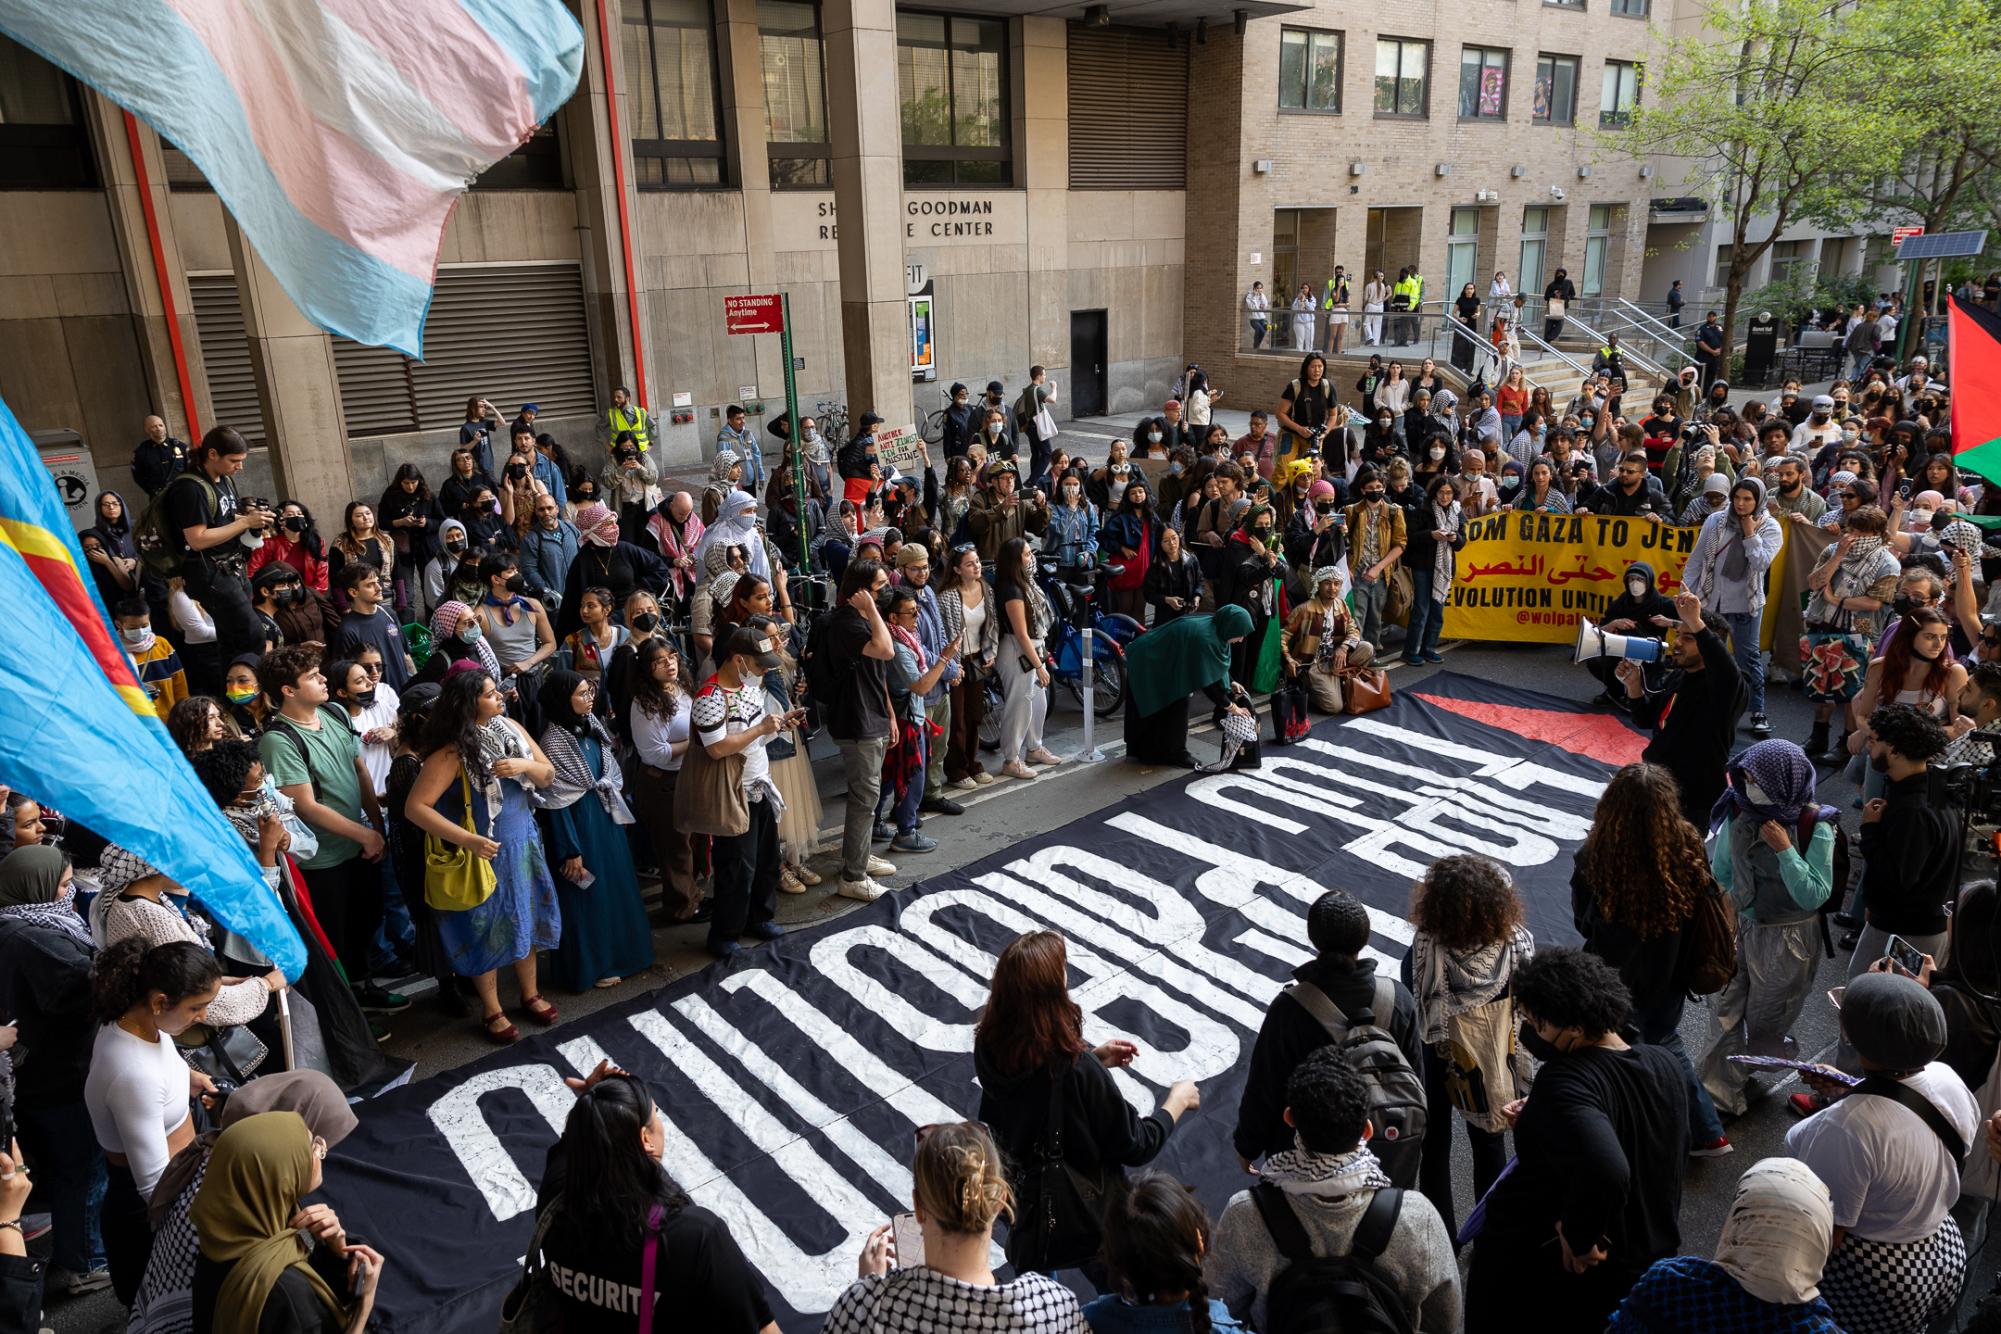 Protesters+gather+at+Paulson+in+citywide+march+through+university+encampments